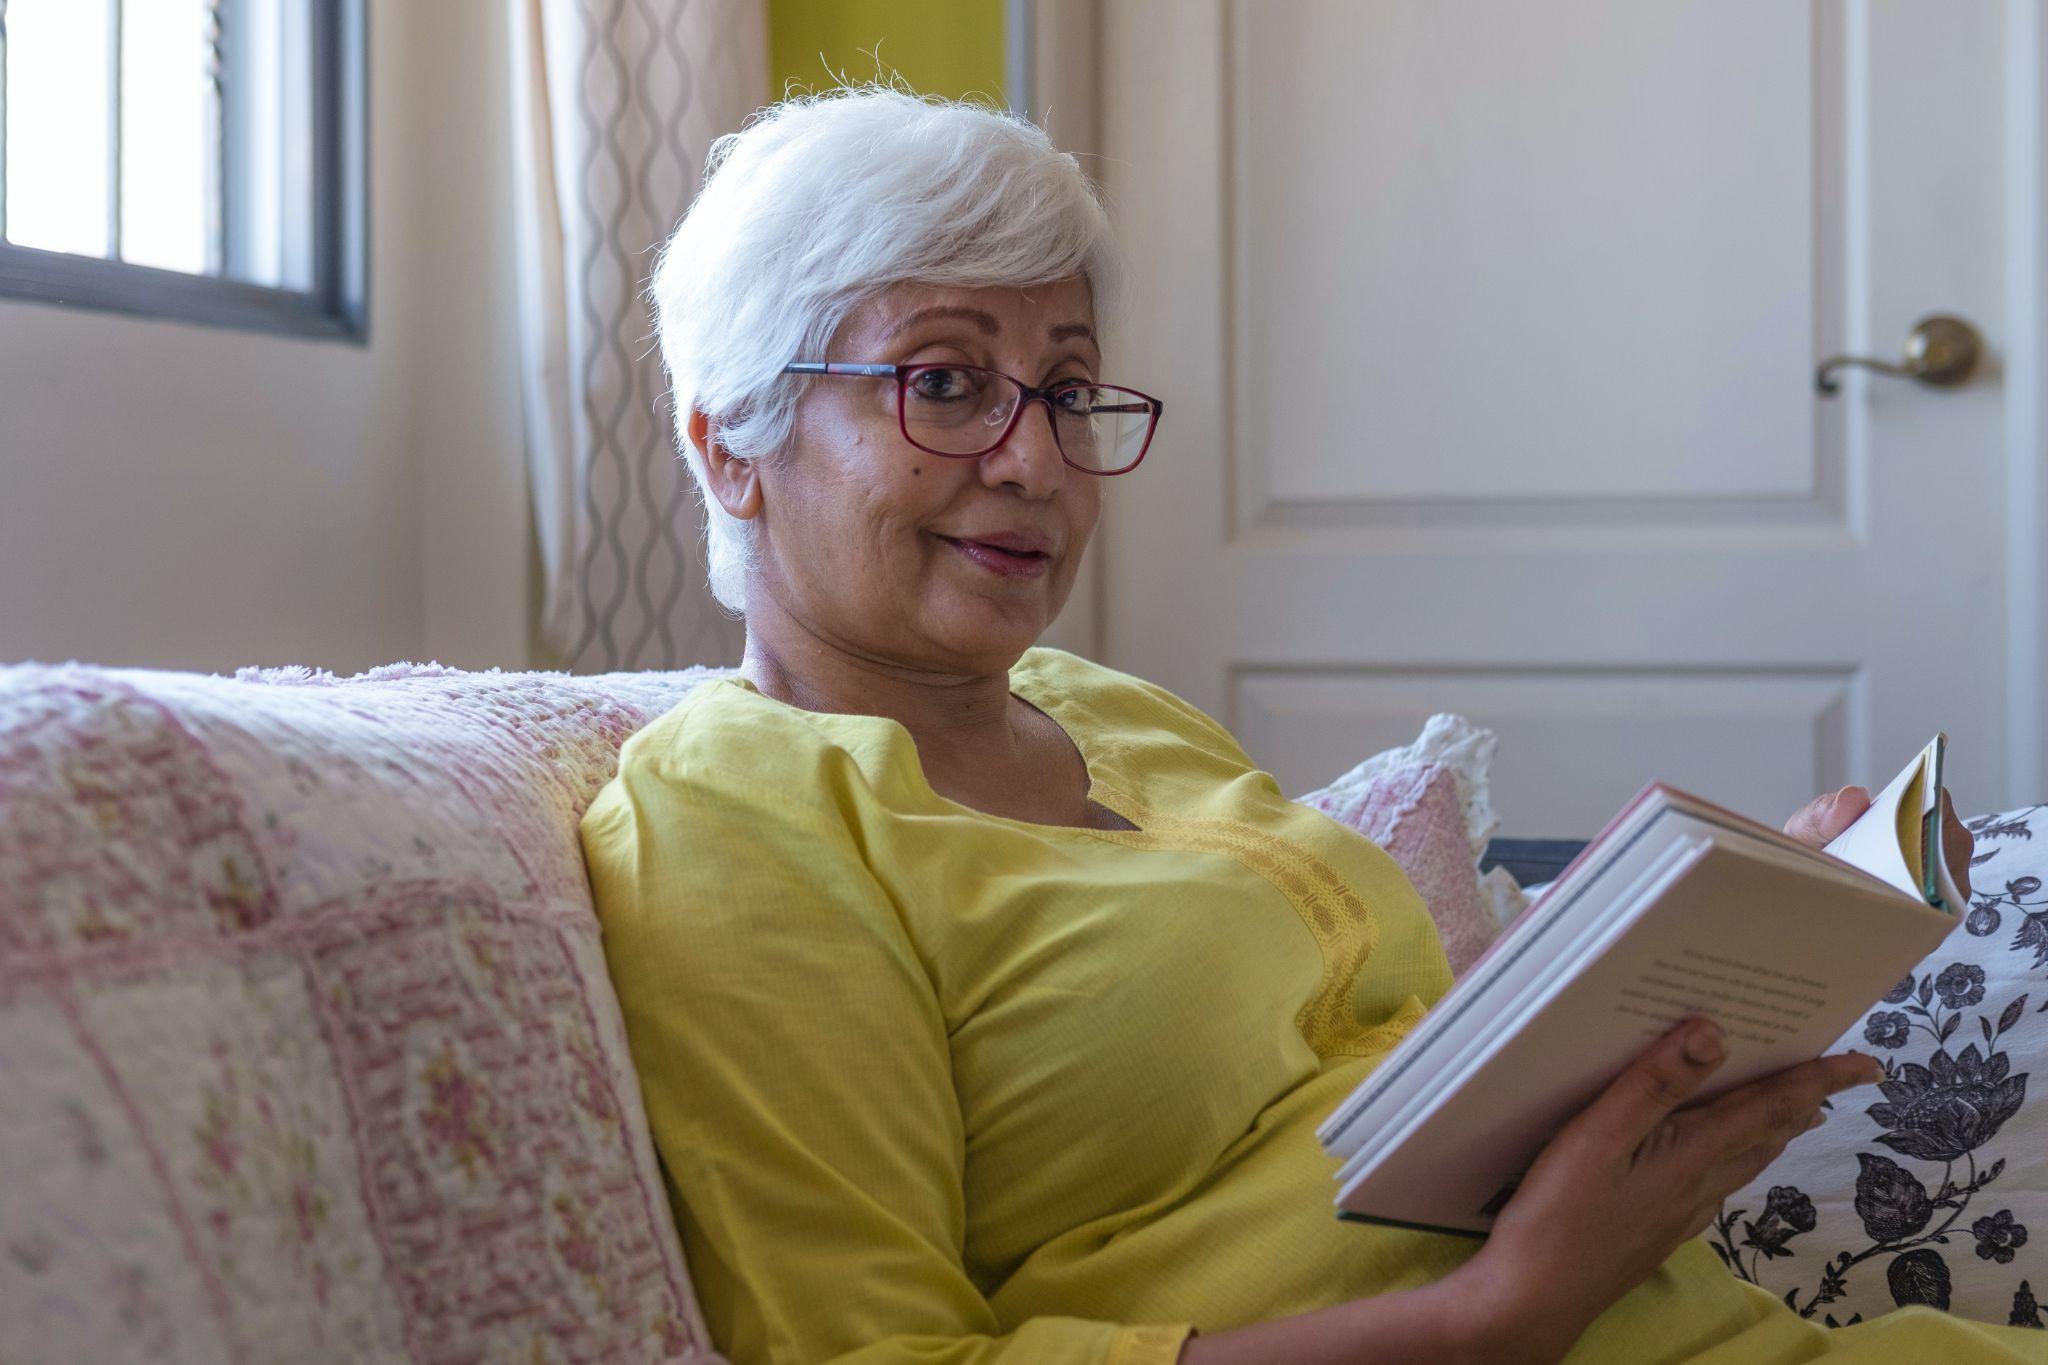 Senior woman sitting on a couch and reading a book.